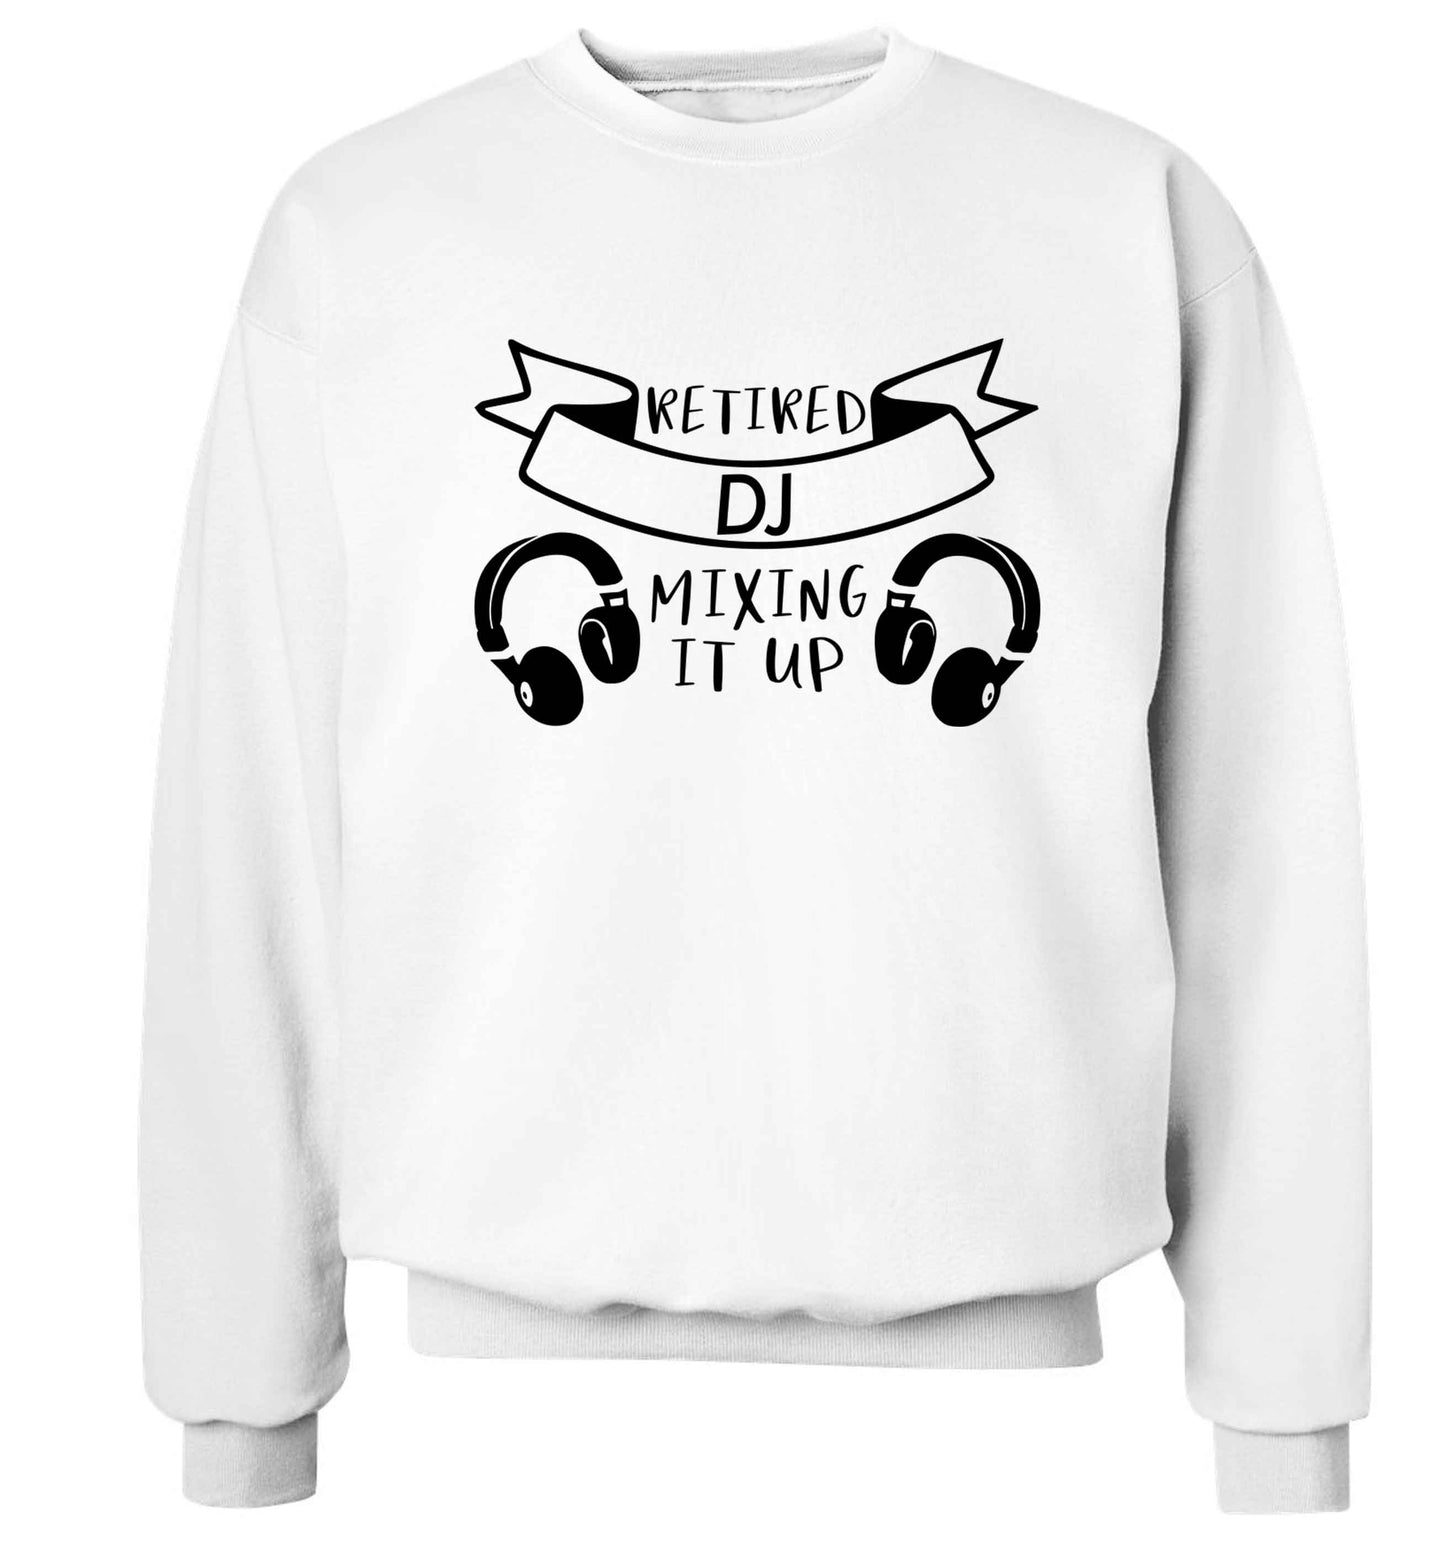 Retired DJ mixing it up Adult's unisex white Sweater 2XL